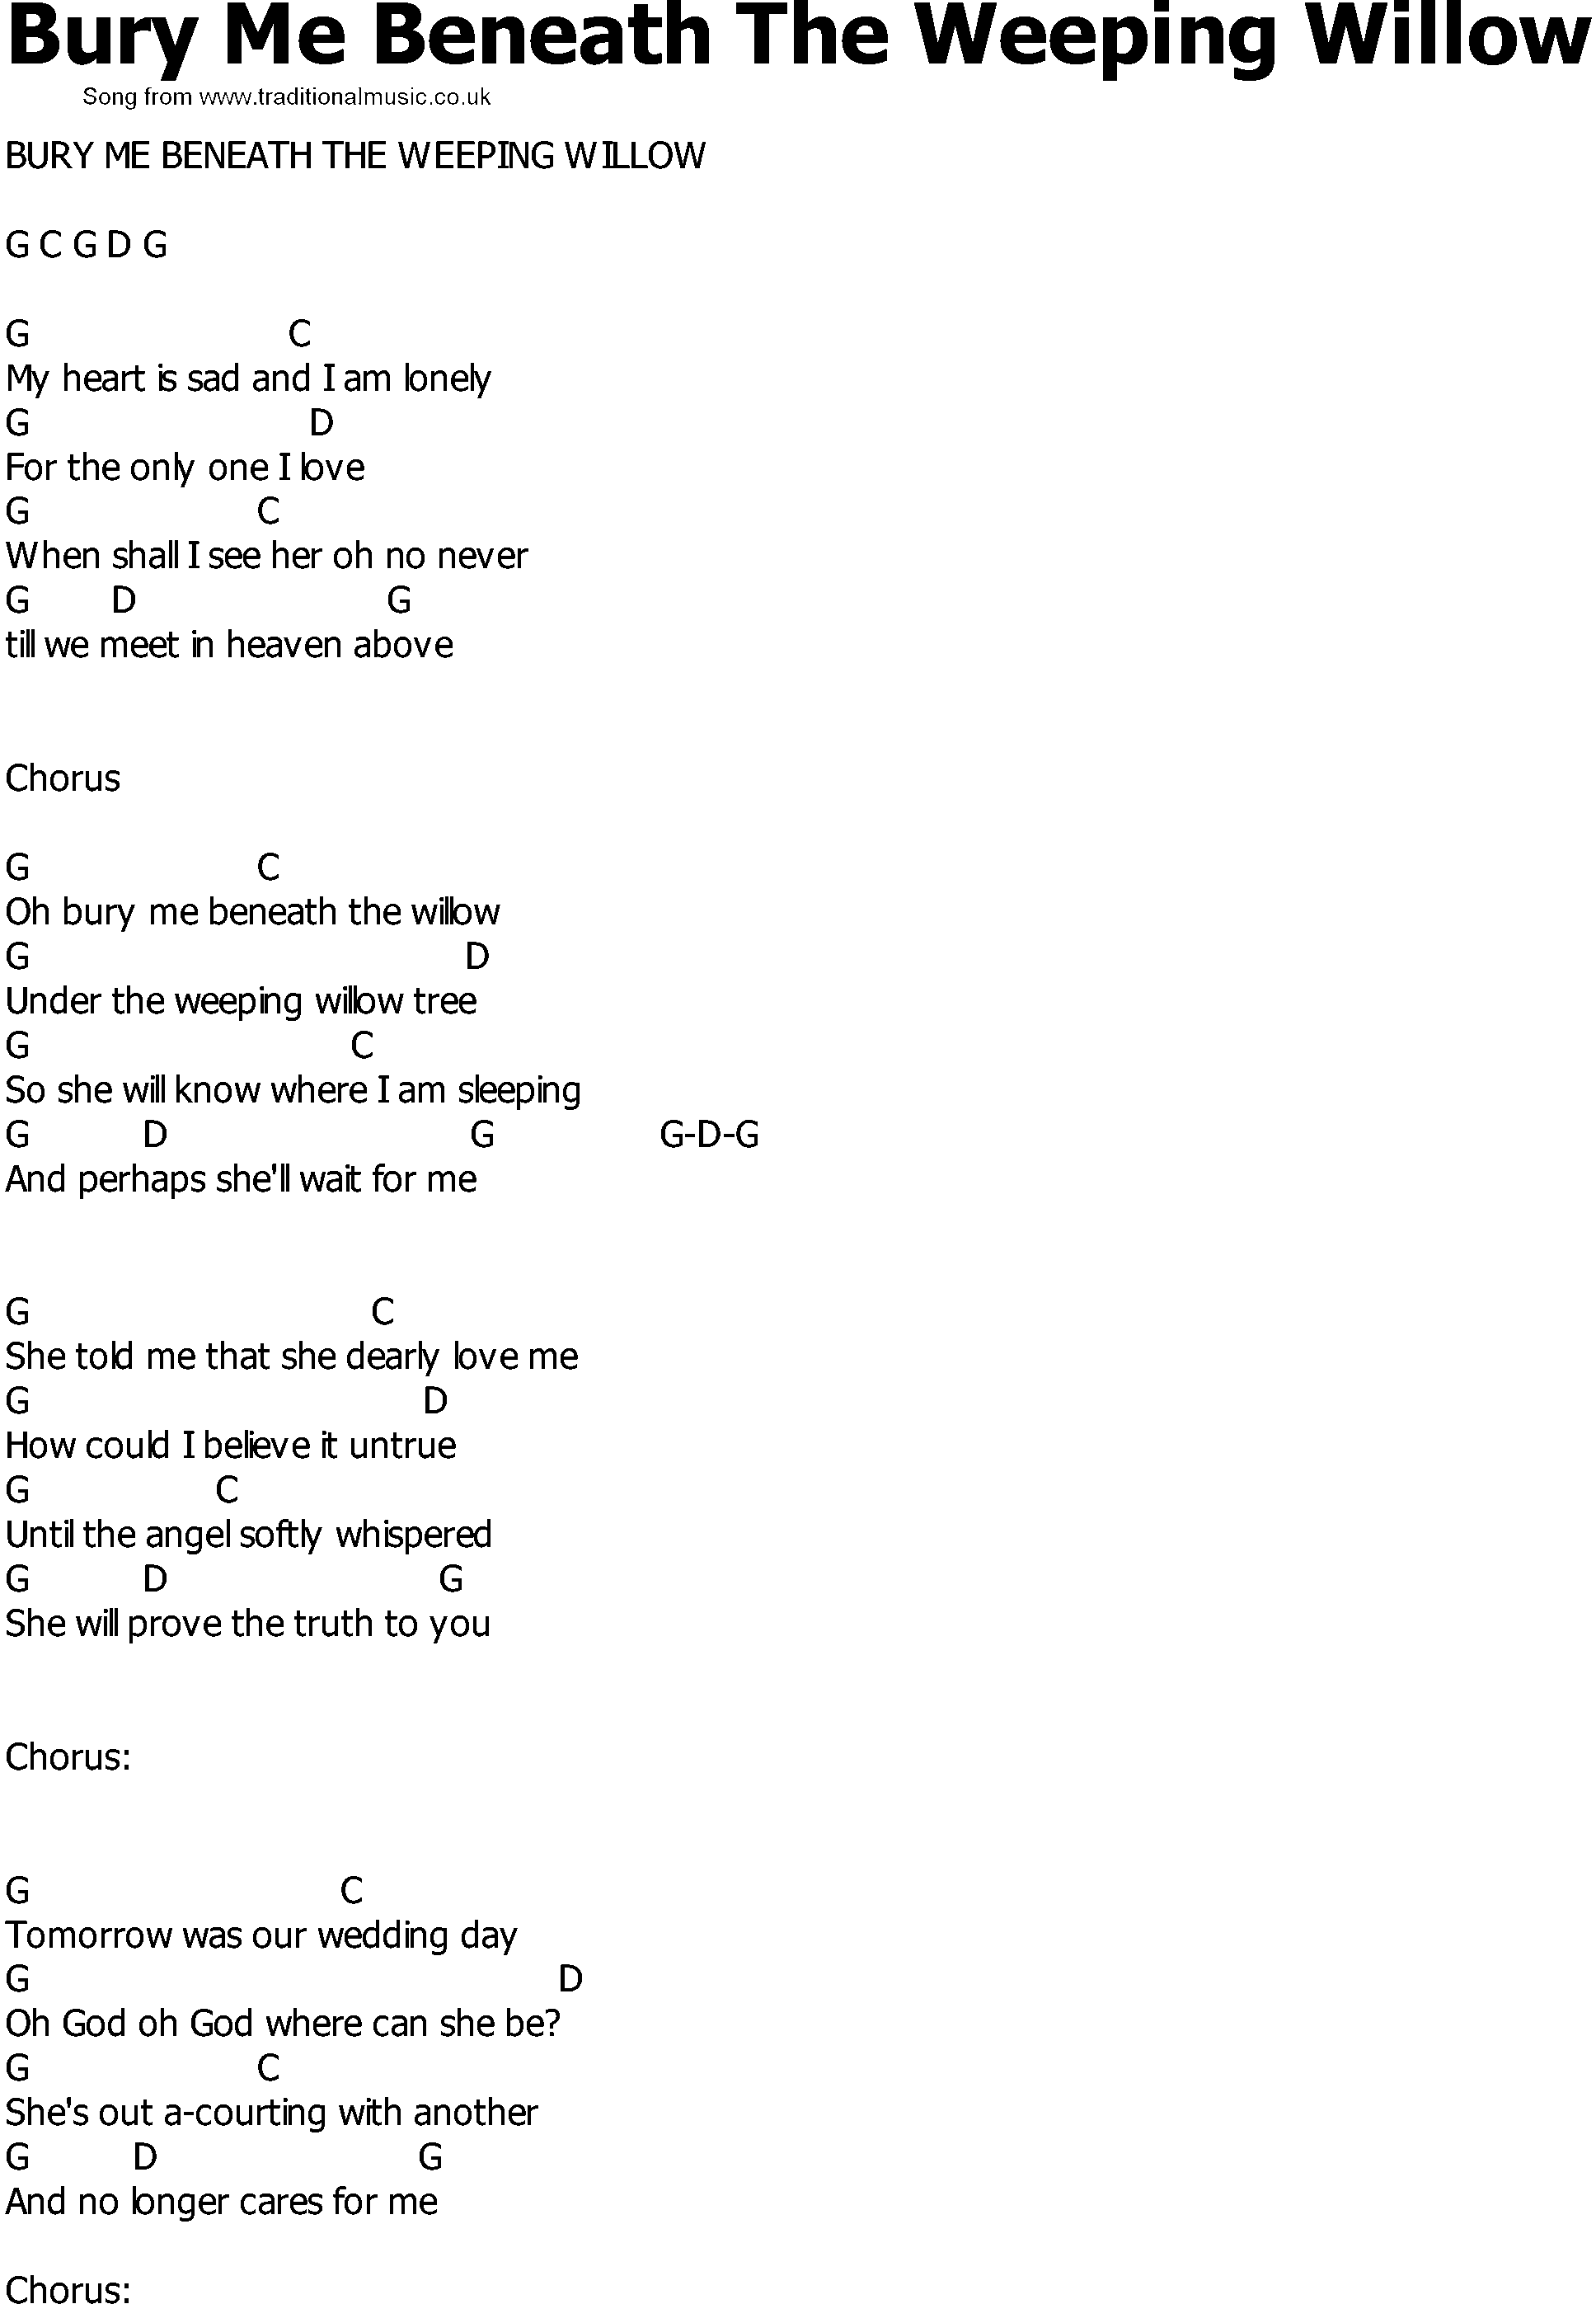 Old Country song lyrics with chords - Bury Me Beneath The Weeping Willow